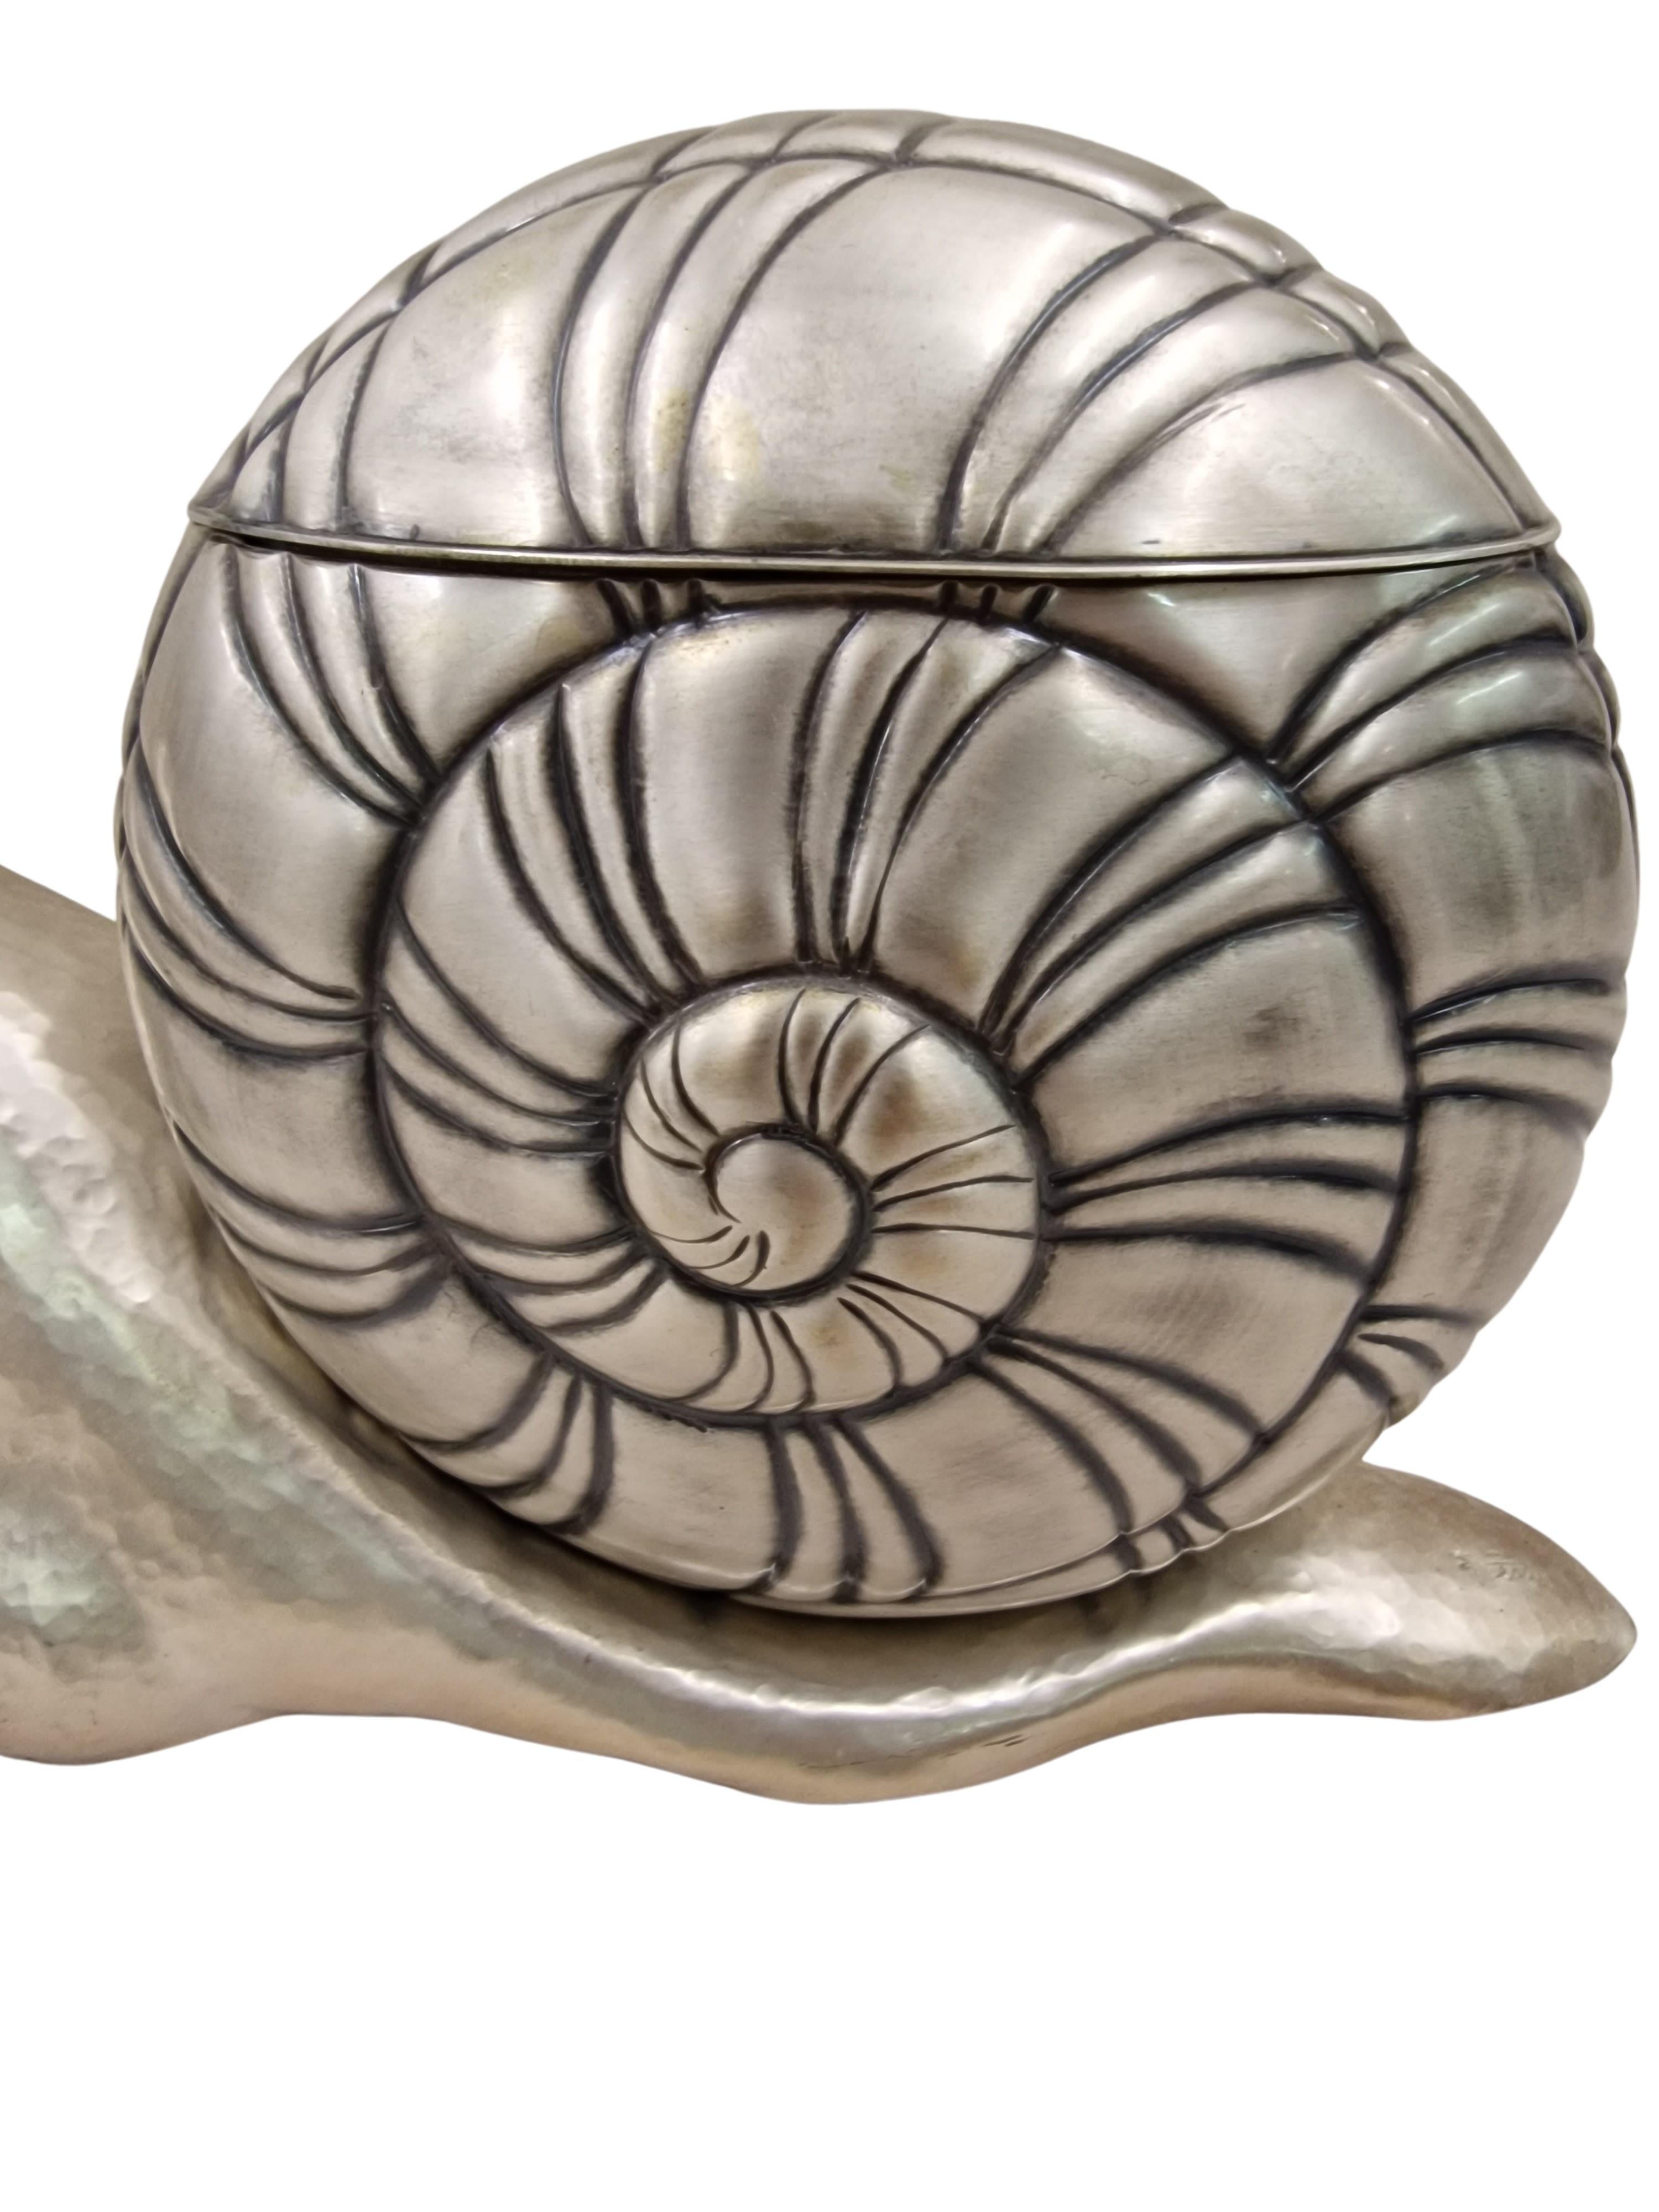 Mid-Century Modern Ice bucket in form of a snail, silver plated, vintage 1960/70 Mid-Century, Italy